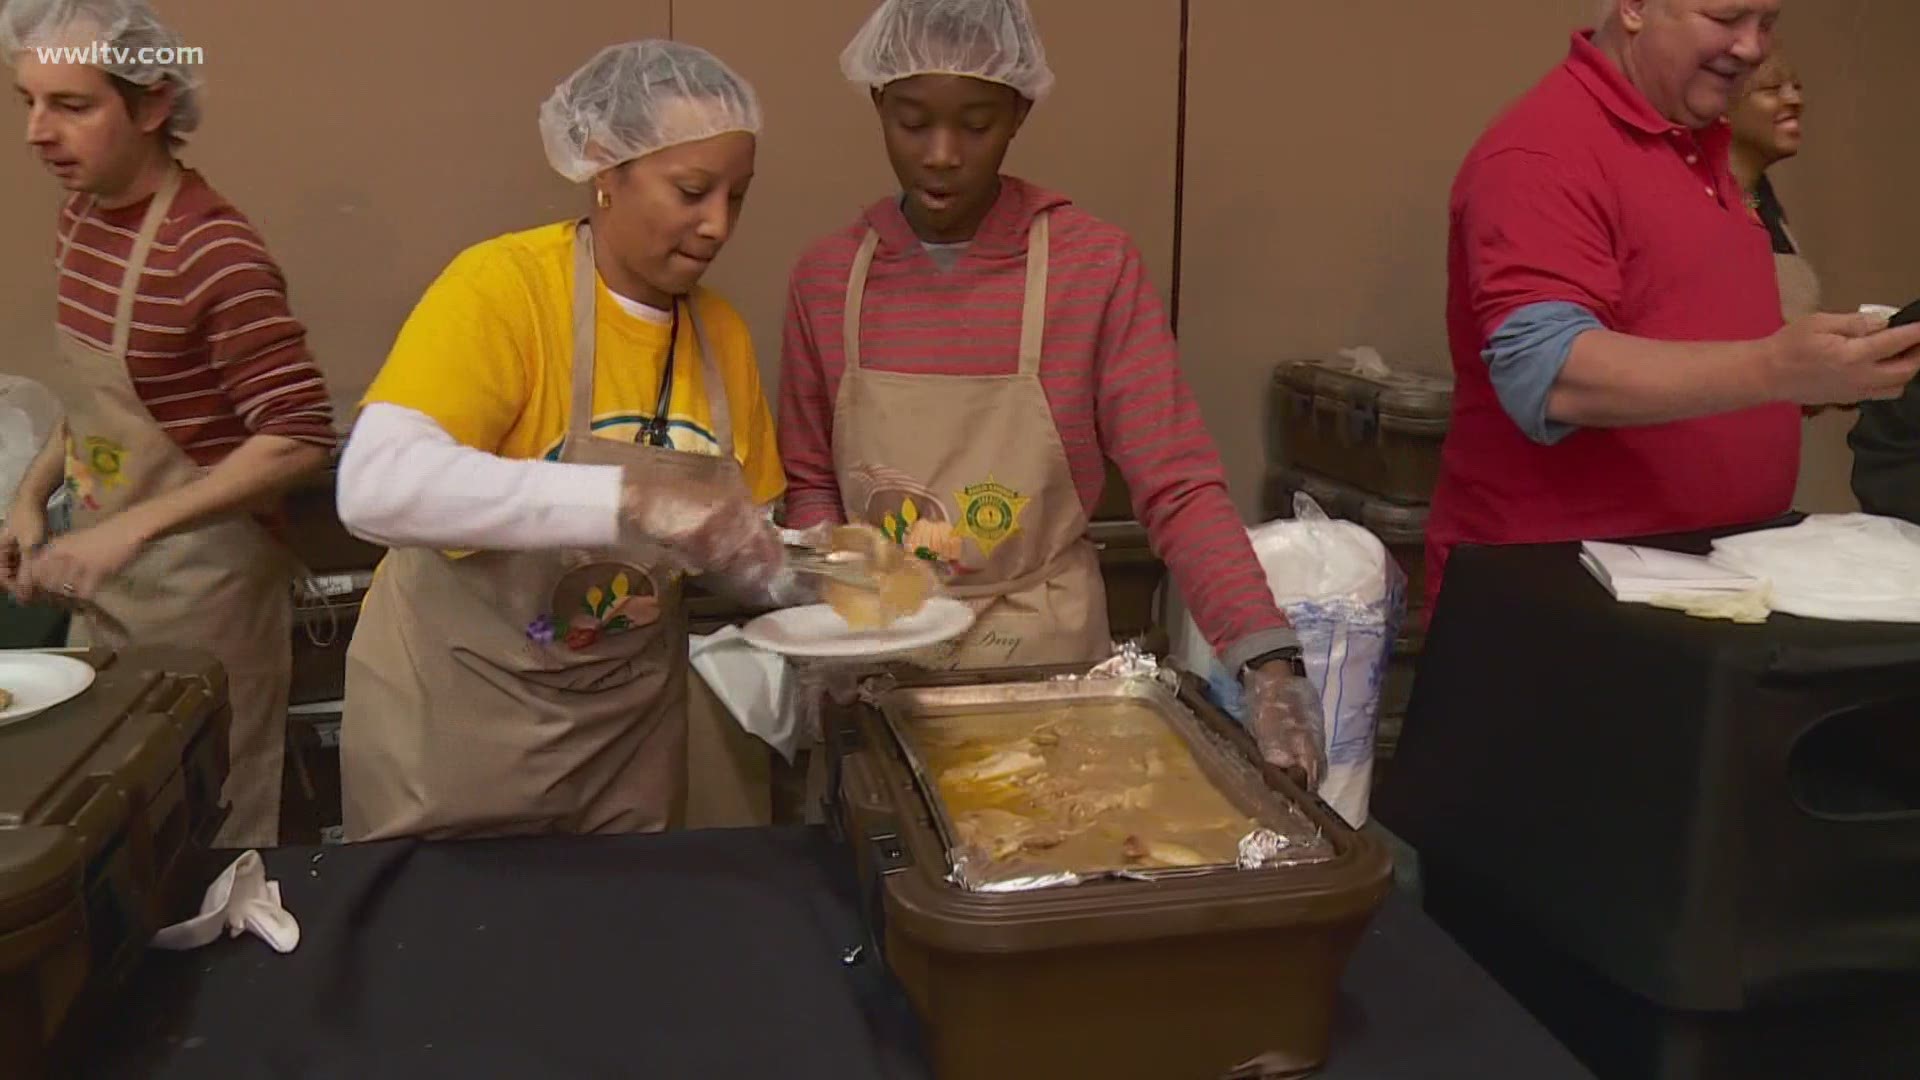 From where the meal can be held, to how many dishes they can serve, community organizations are having to adjust their holiday meal